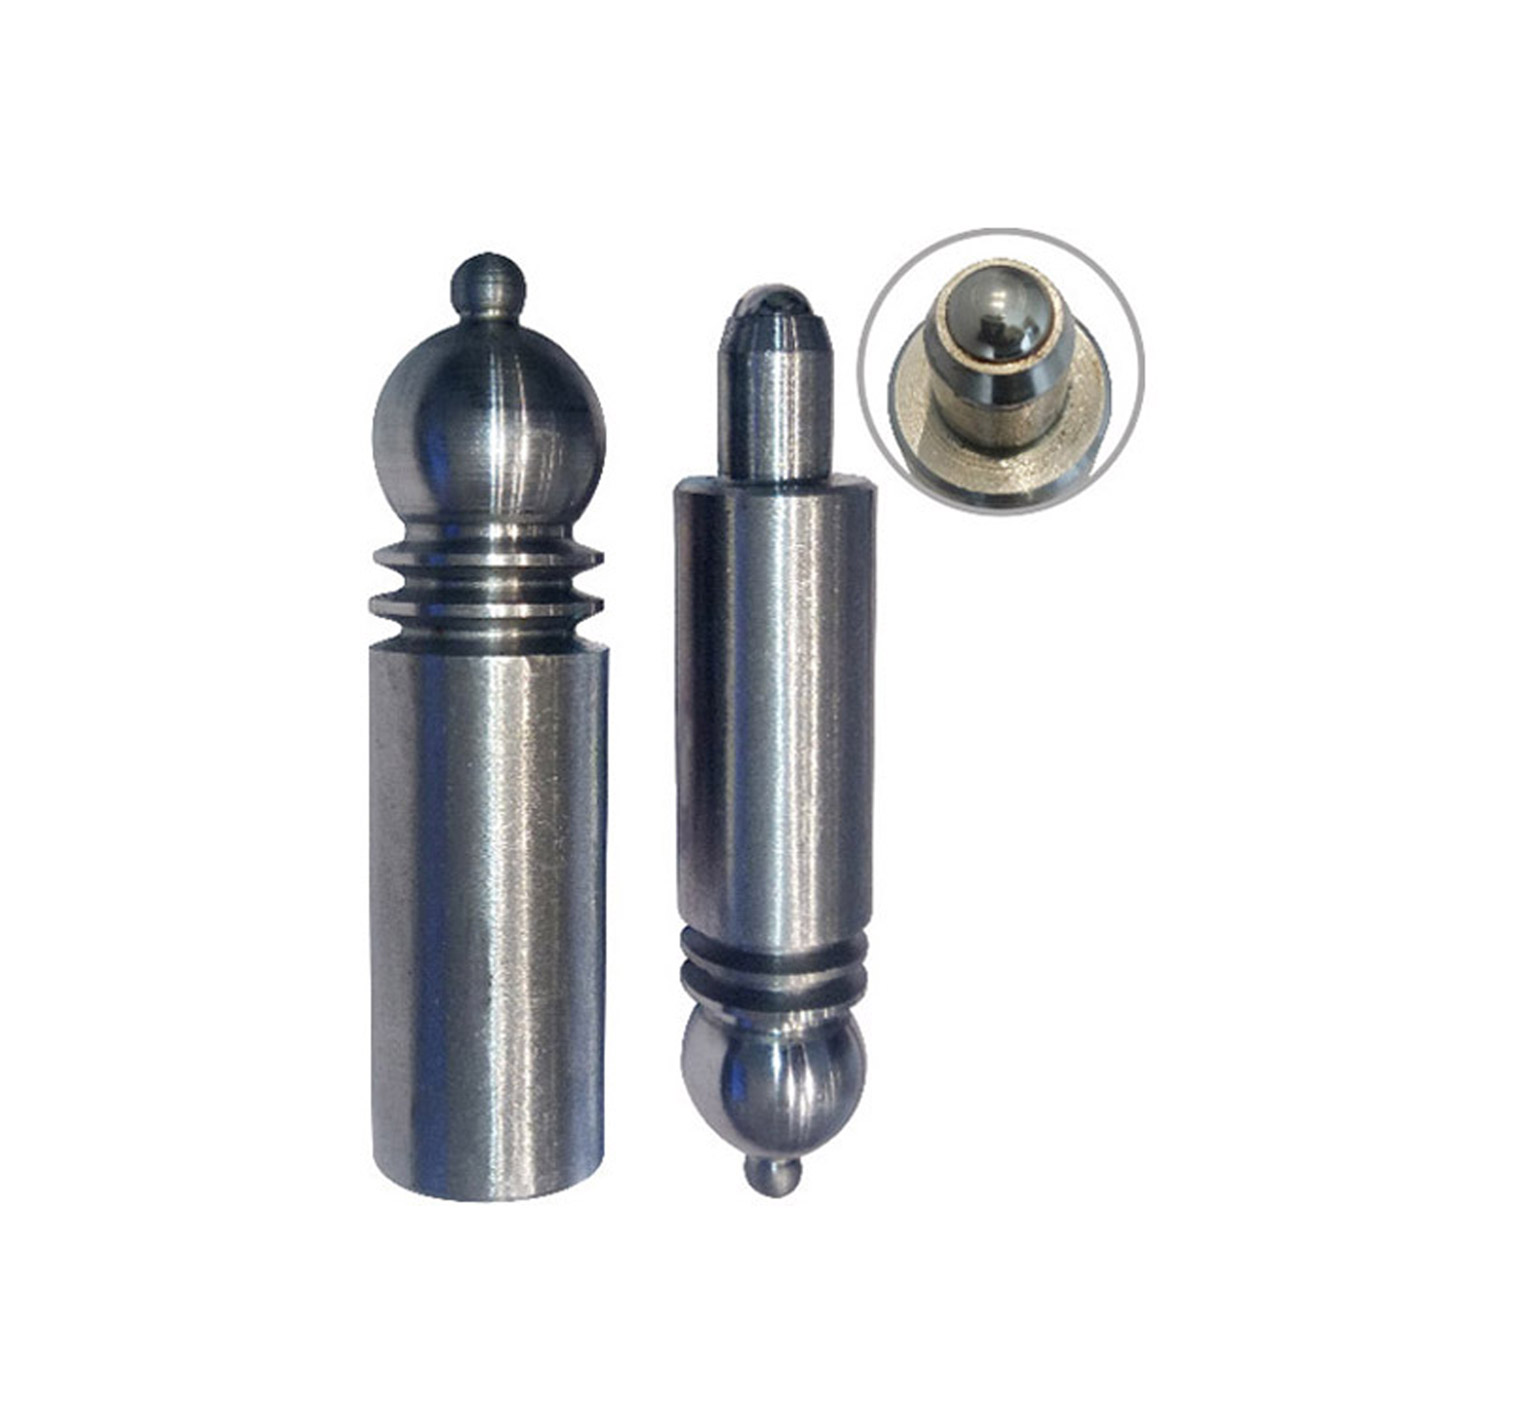 Suppliers & Traders of Hinges With Steel Ball In India, Punjab & Ludhiana